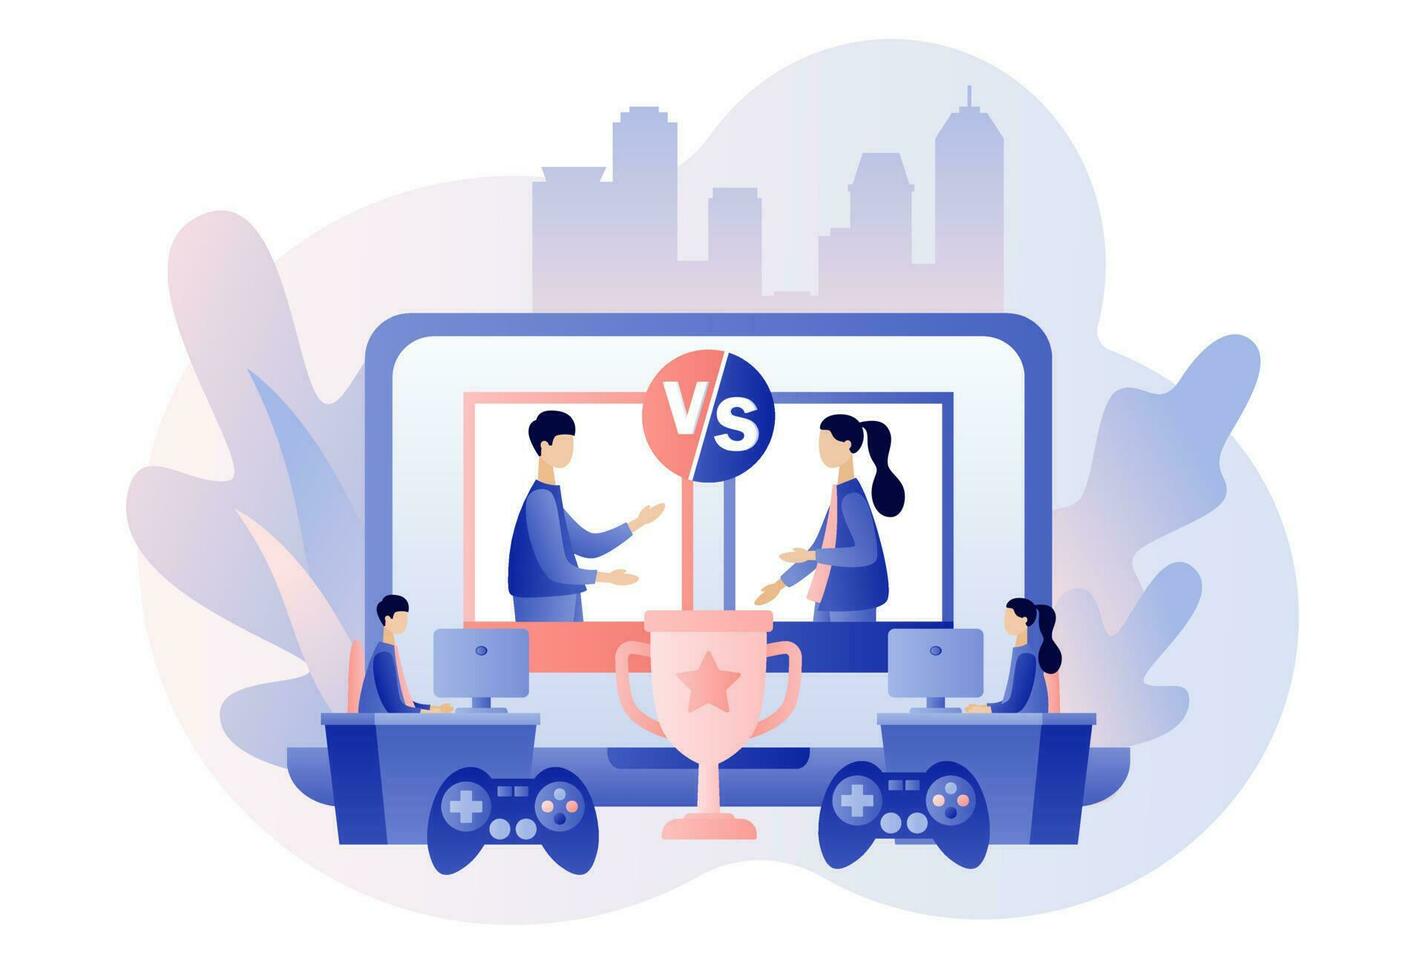 E-sport and cybersport concept. Professional gamers at video game online tournament competing for trophy. Modern flat cartoon style. Vector illustration on white background